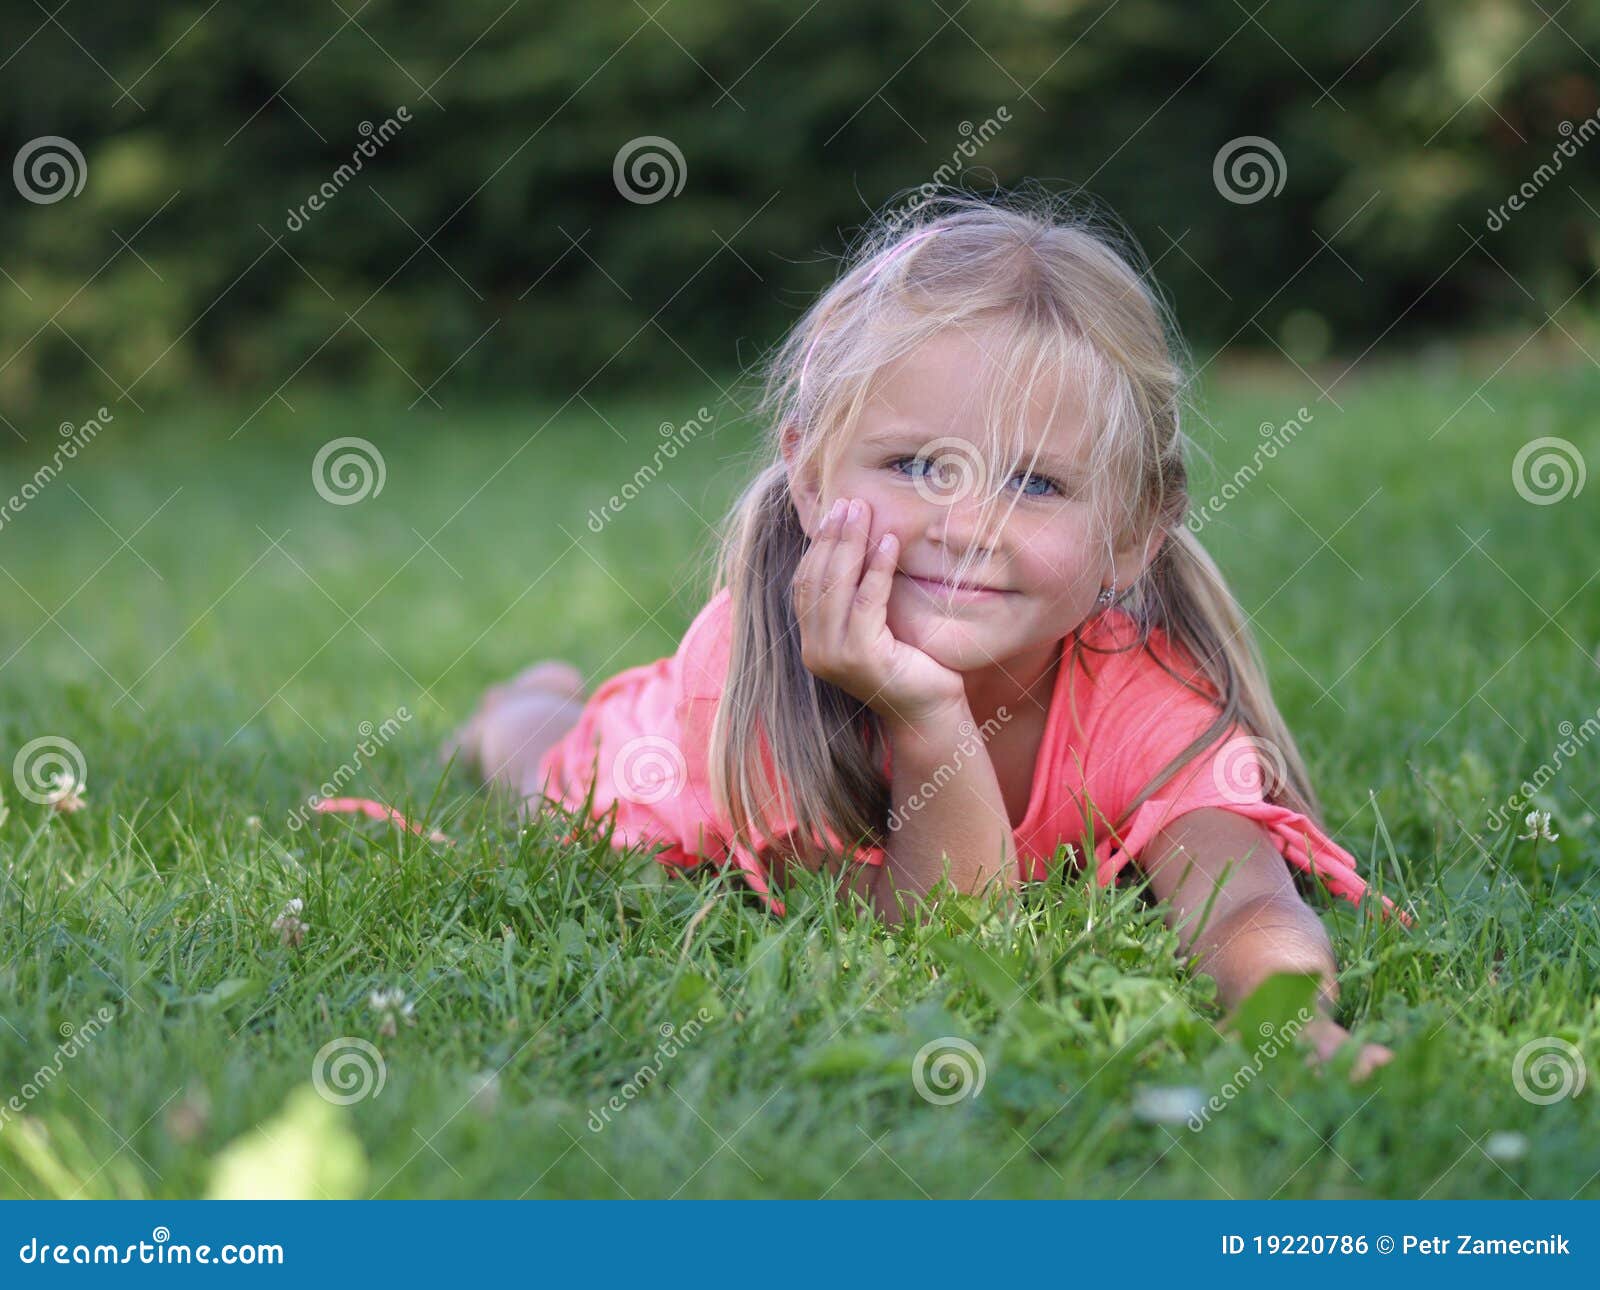 Smiling girl on grass stock photo. Image of barefoot - 19220786